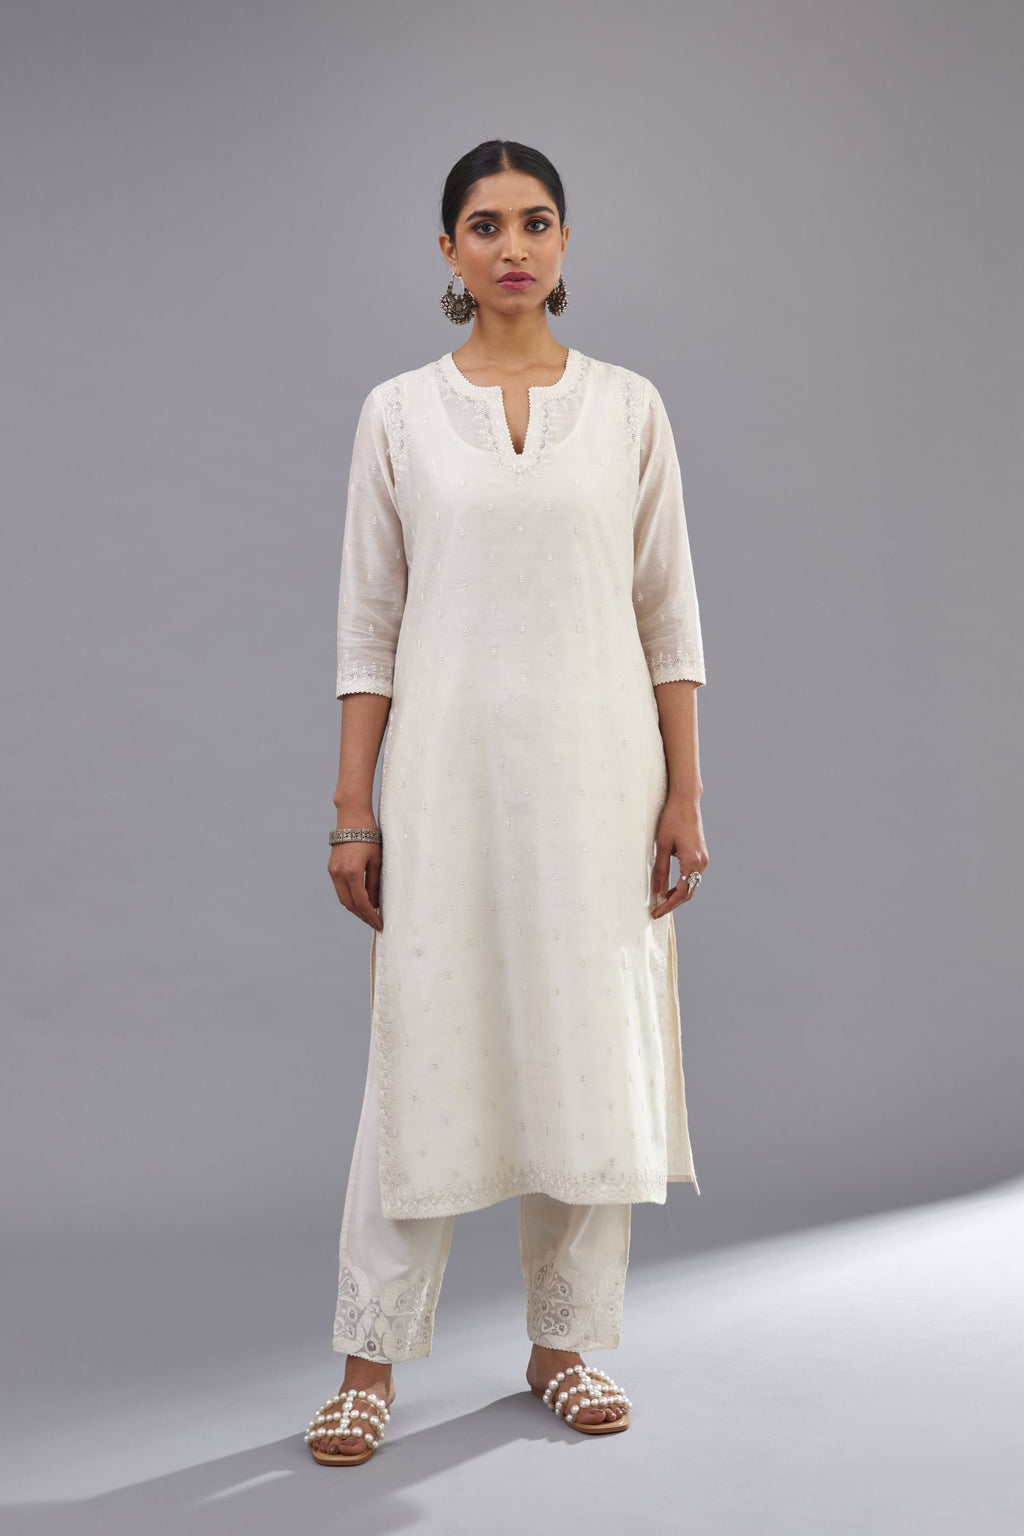 Off white silk chanderi straight kurta set with dori and silk thread embroidery at the neck, armholes, hem and sleeve cuffs.